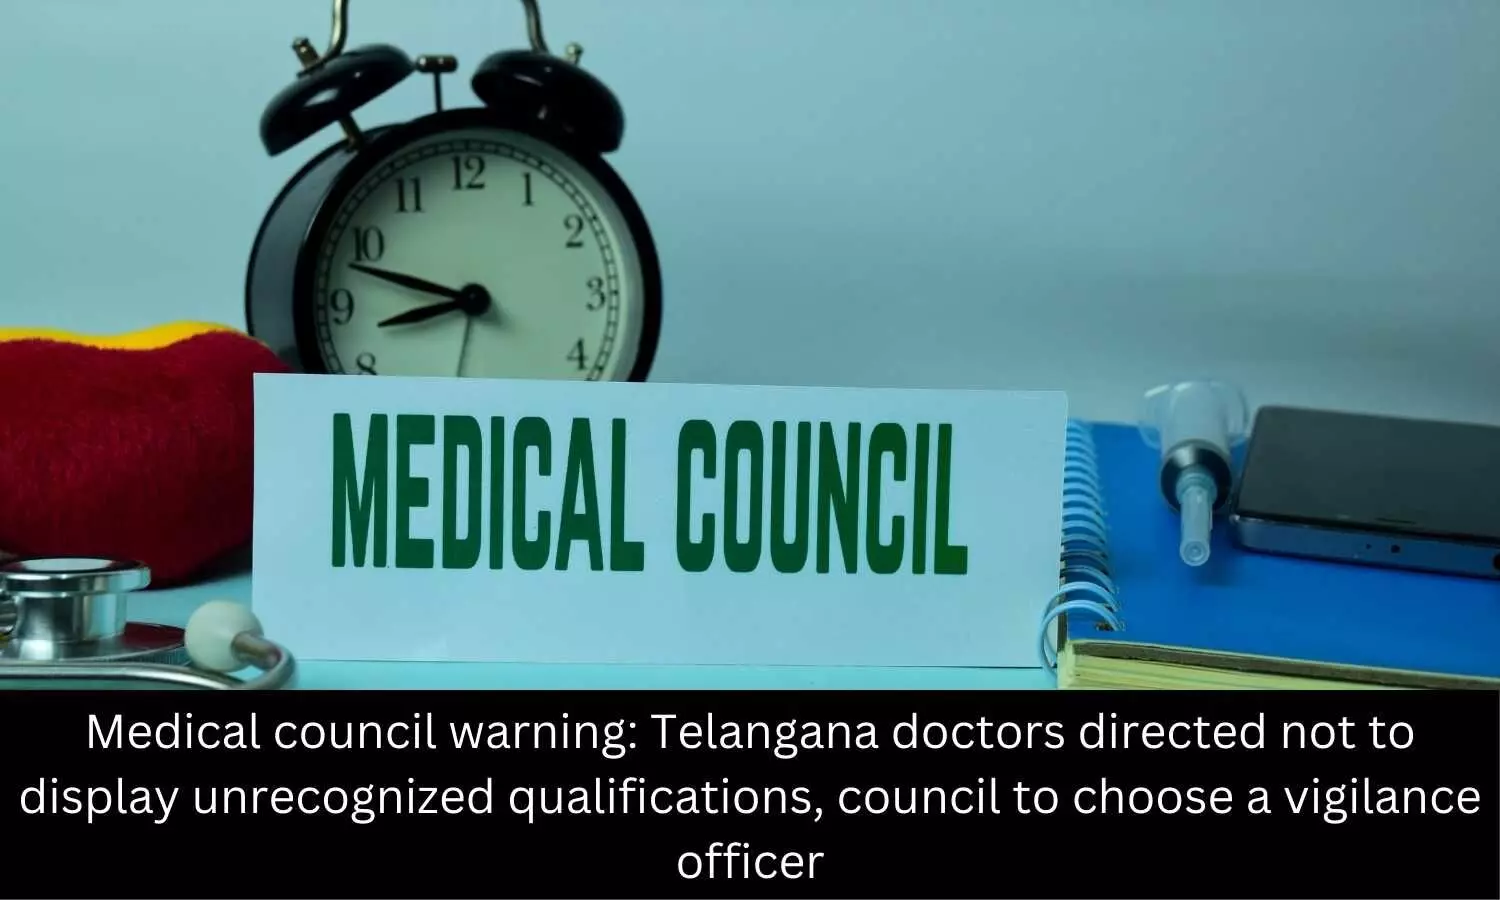 Medical council warning: Telangana doctors directed not to display unrecognized qualifications, council to choose a vigilance officer